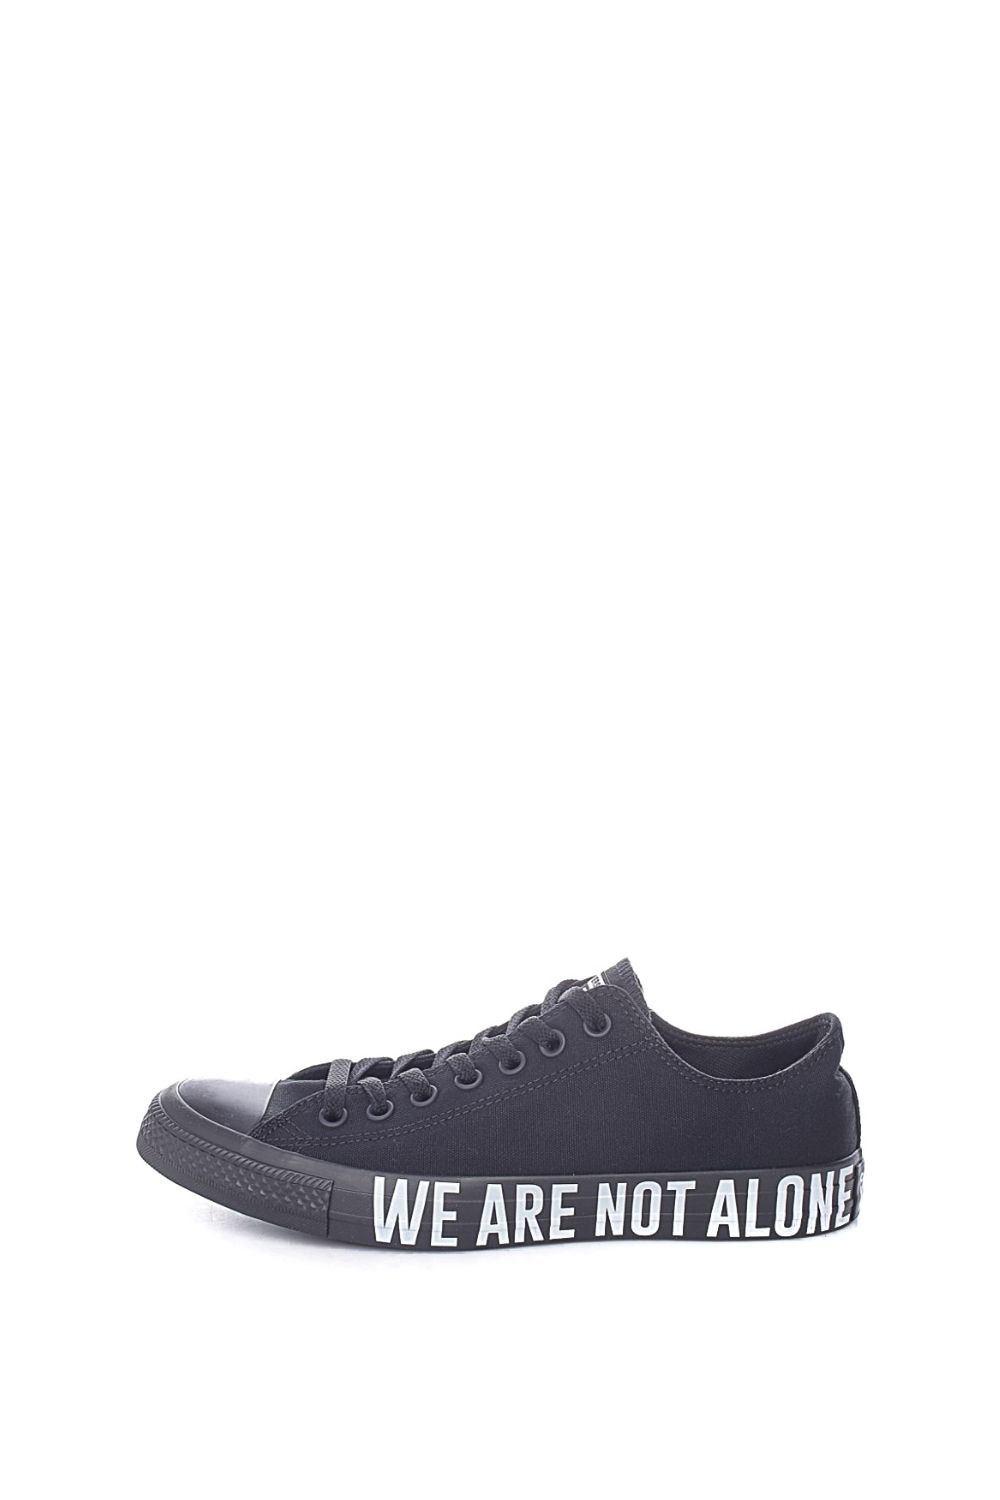 CONVERSE – Unisex sneakers CONVERSE Chuck Taylor All Star μαύρα